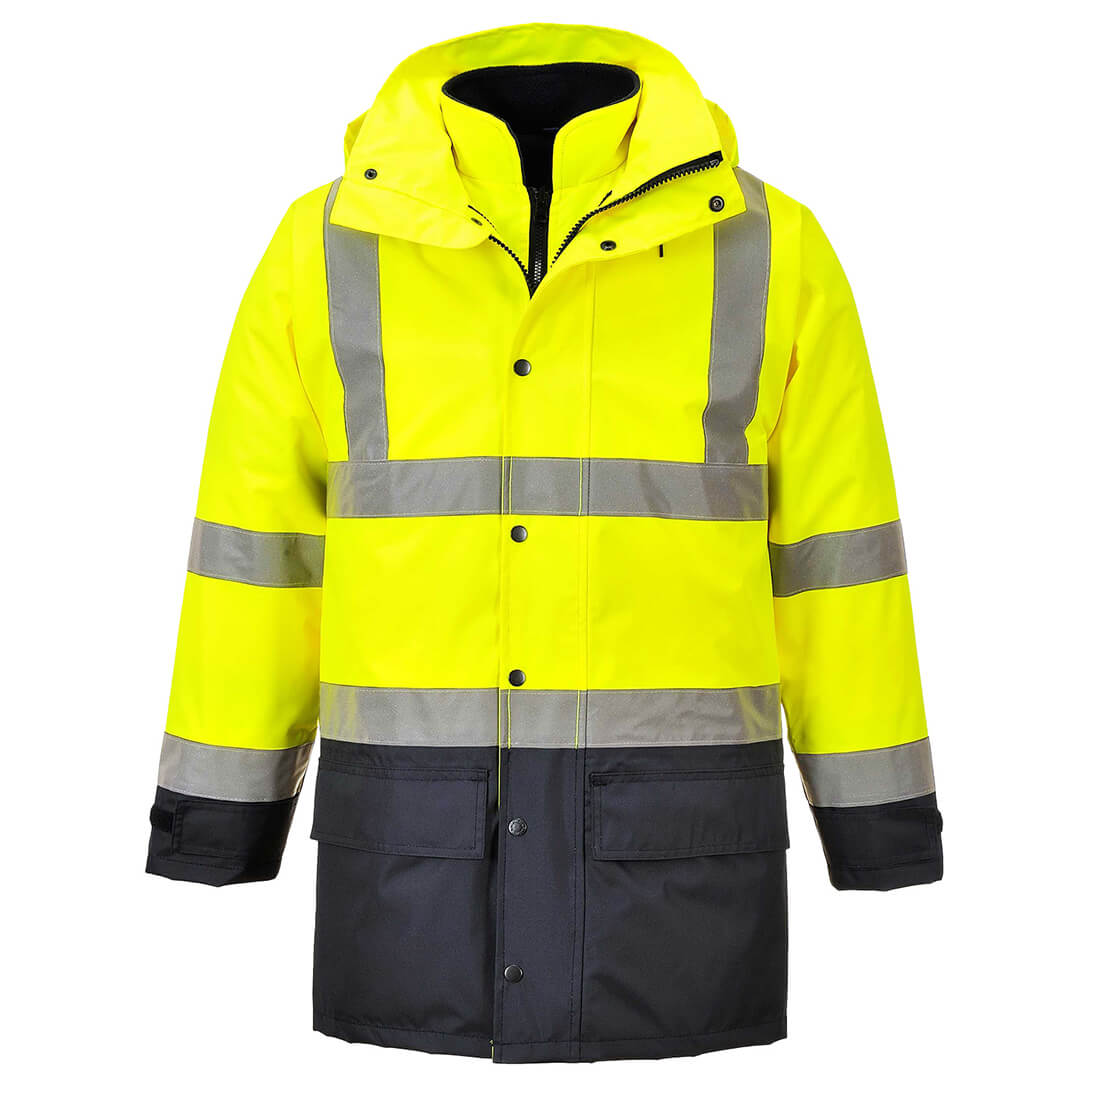 Photo of Oxford Weave 300d Class 3 Hi Vis 5-in1 Executive Jacket Yellow / Navy 5xl